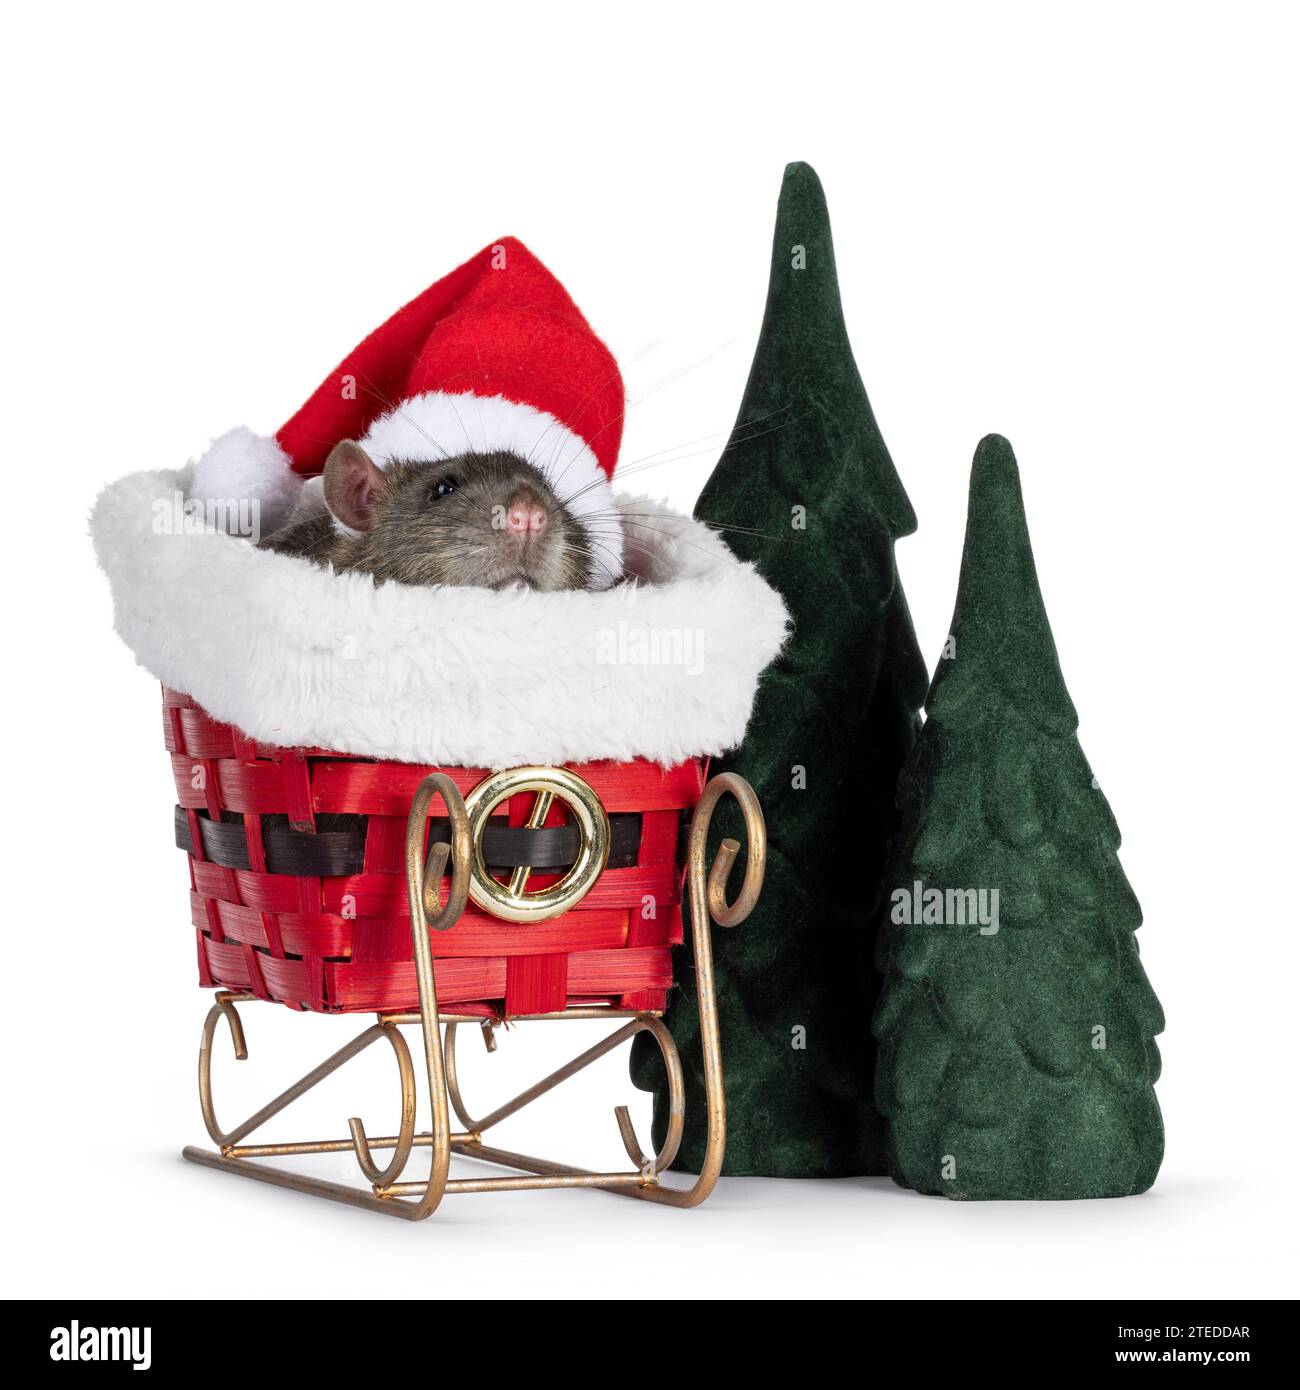 Cute tame rat, sitting in sleigh wearing santa hat. Winter scene with fake trees. Isolated on a white background. Stock Photo